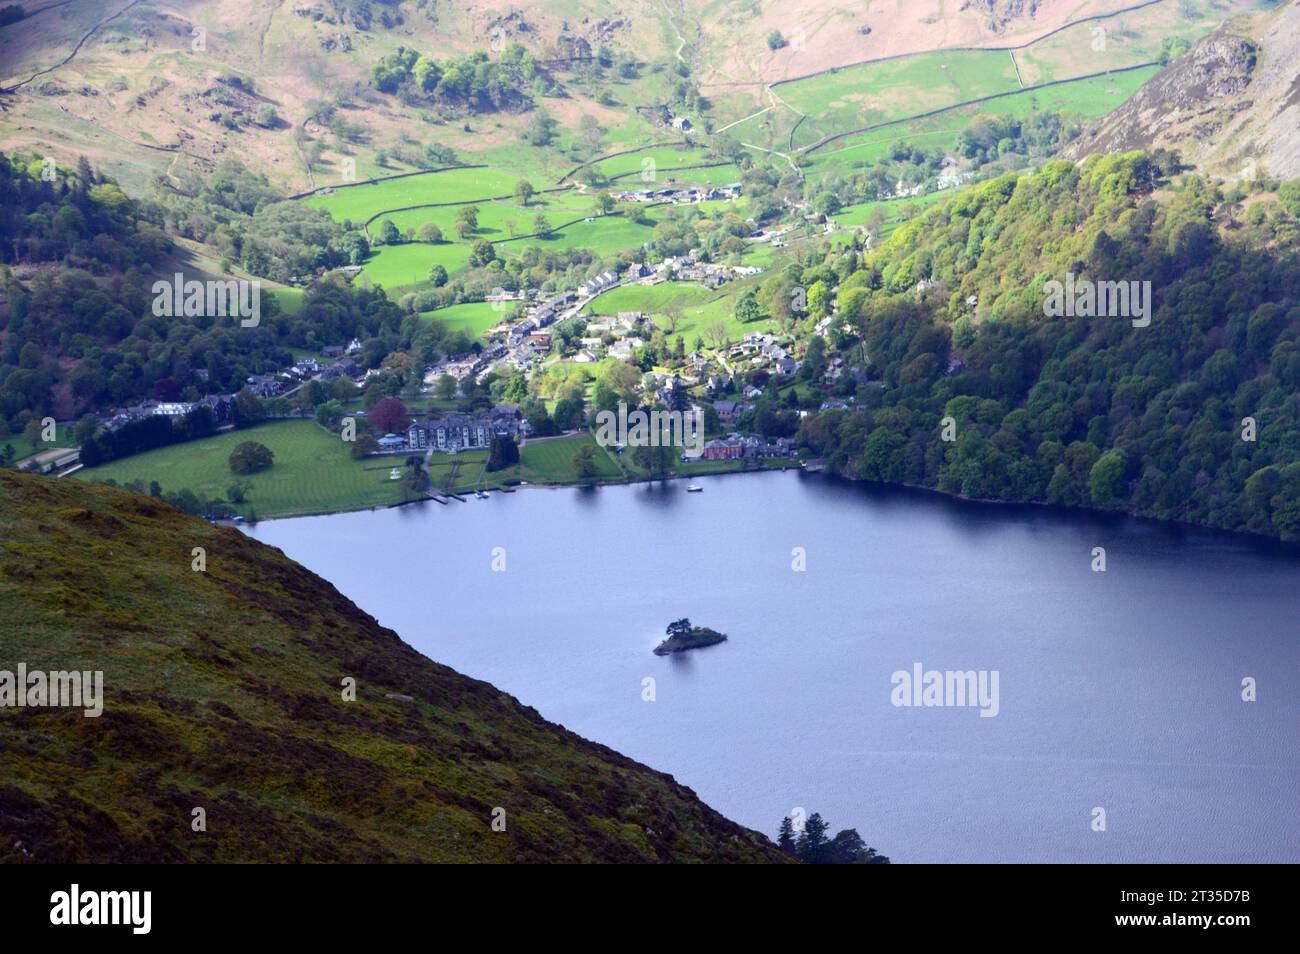 Ullswater Lake and the Glenridding Valley from the Summit of 'Birk Fell' in the Lake District National Park, Cumbria, England, UK Stock Photo